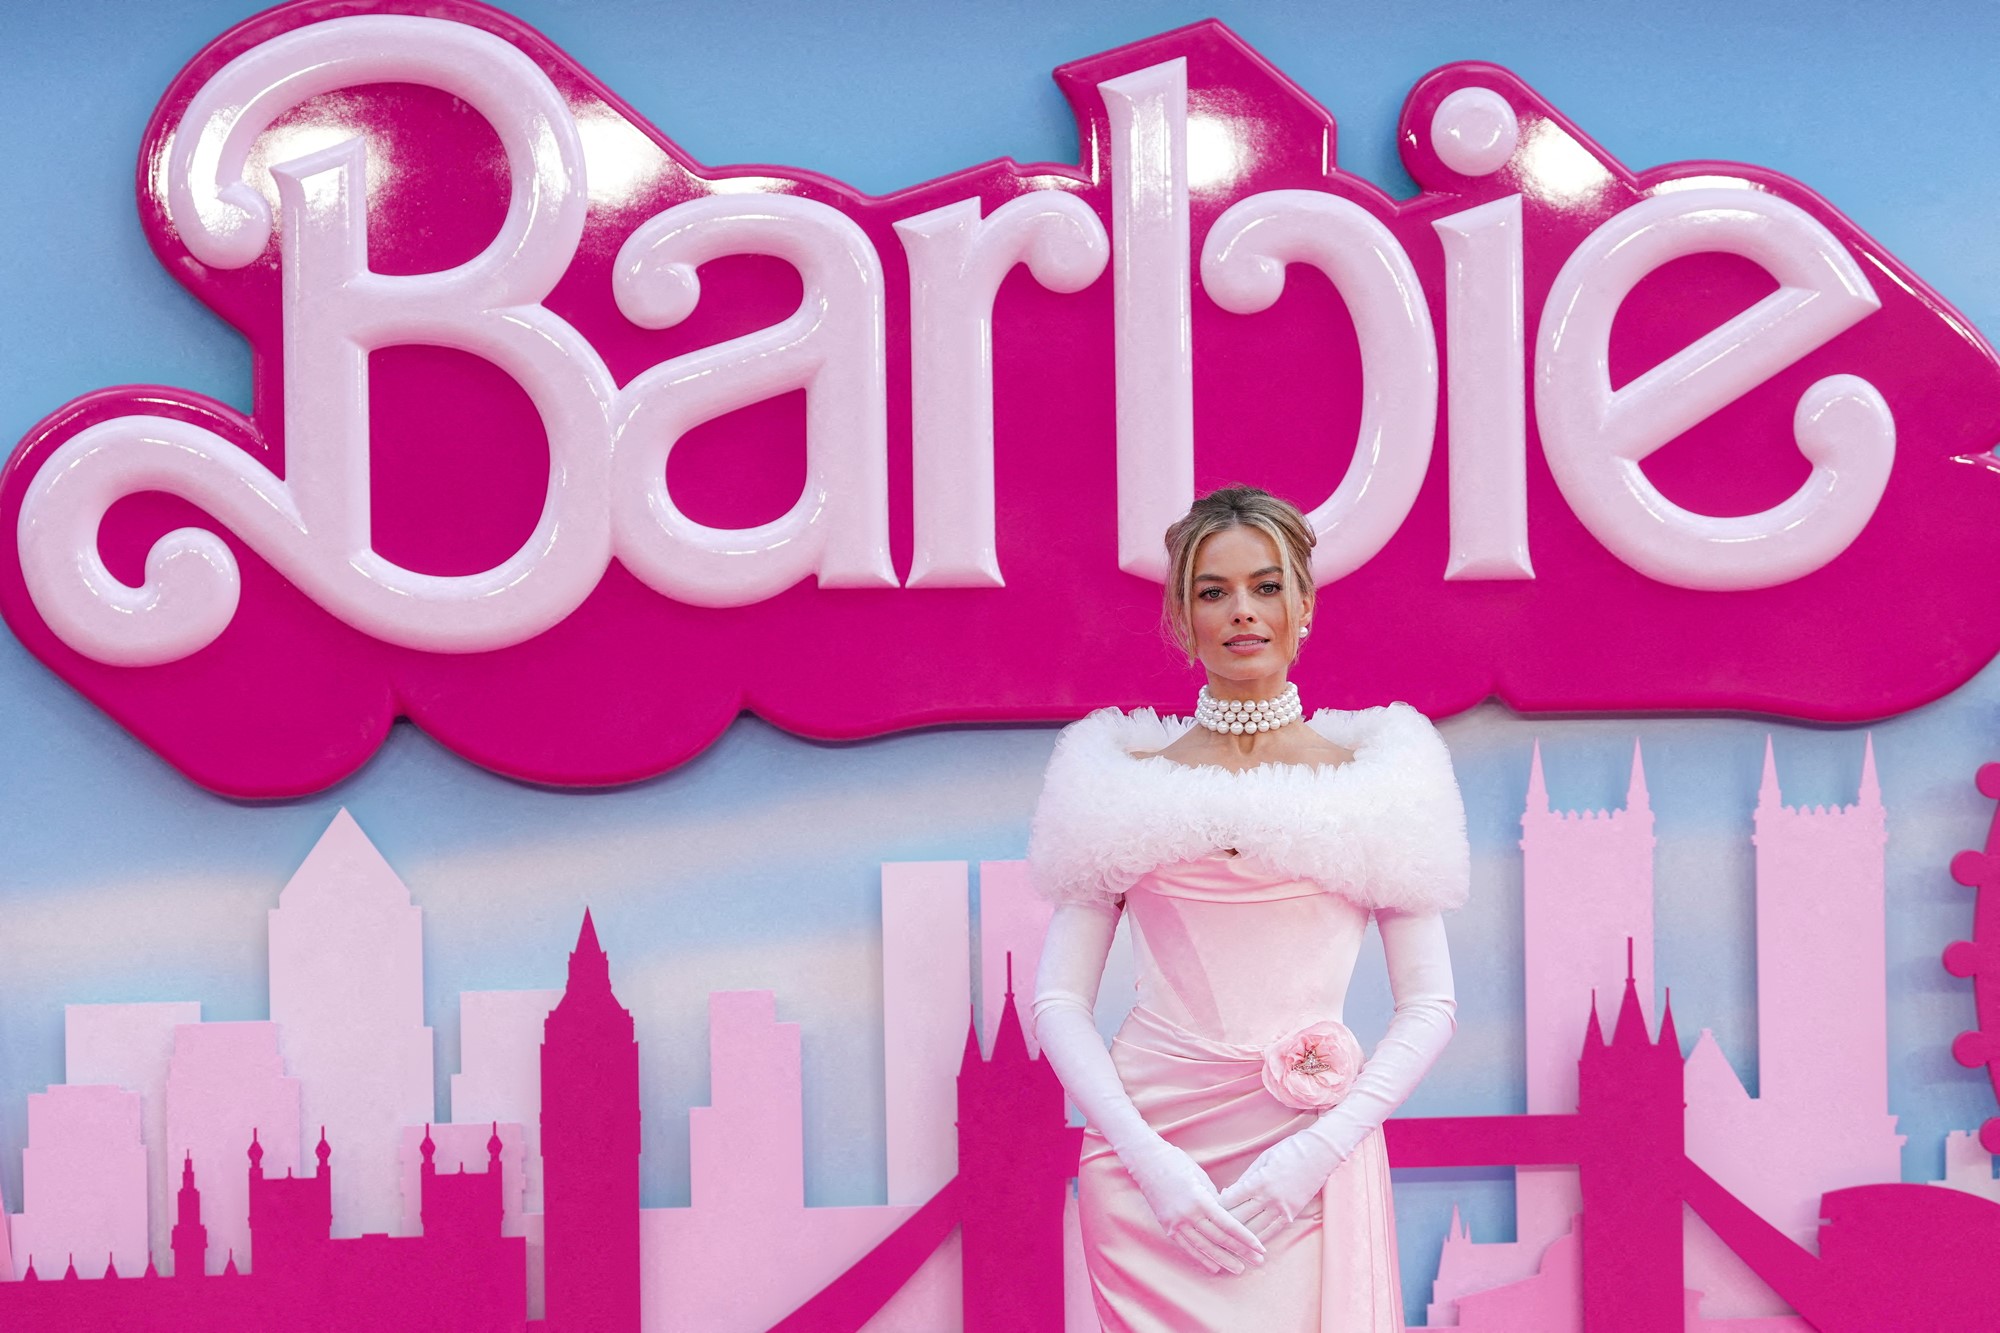 Margot robbie in a pink dress in front of a barbie premiere back drop 